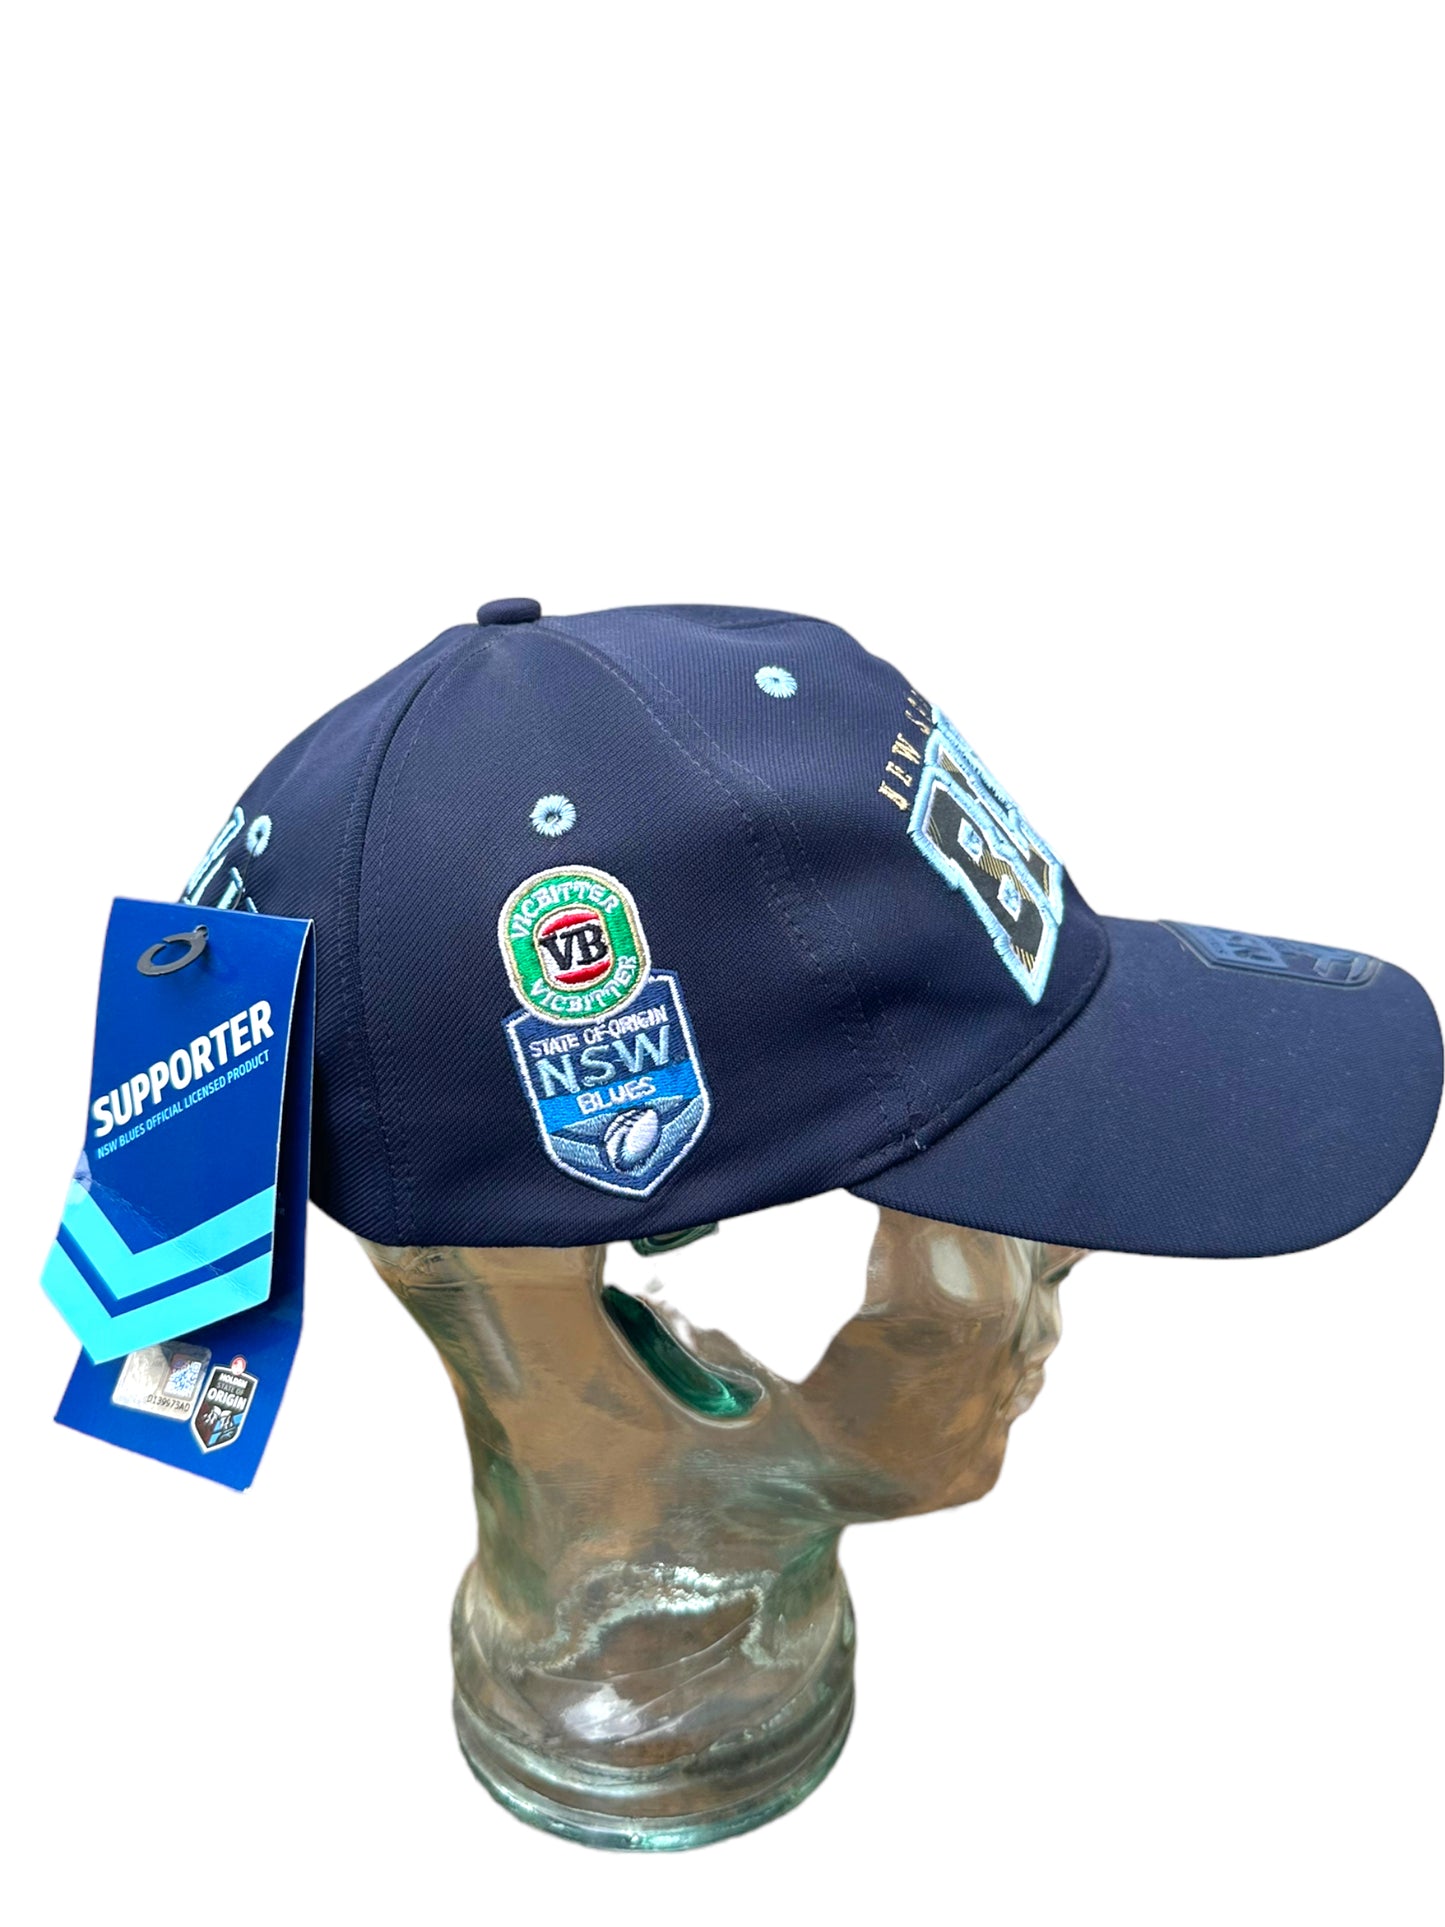 NSW BLUES HAT NEW WITH TAGS